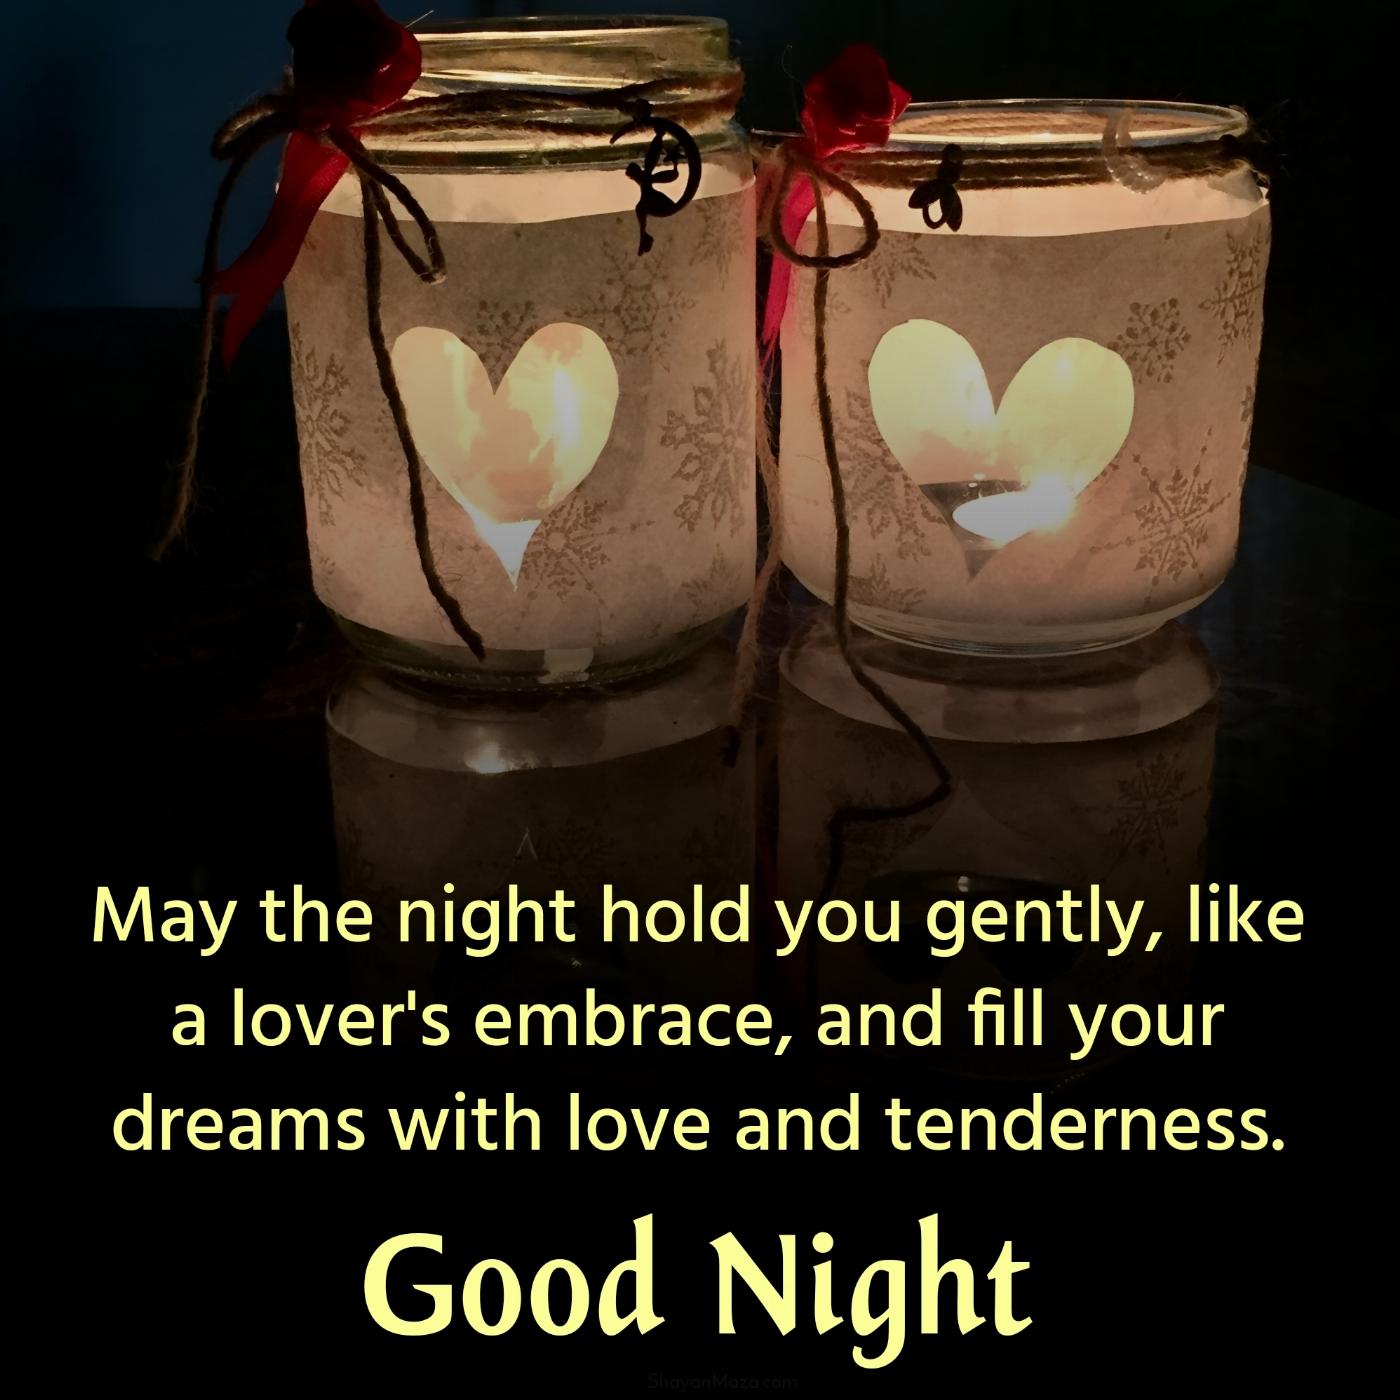 May the night hold you gently like a lover's embrace